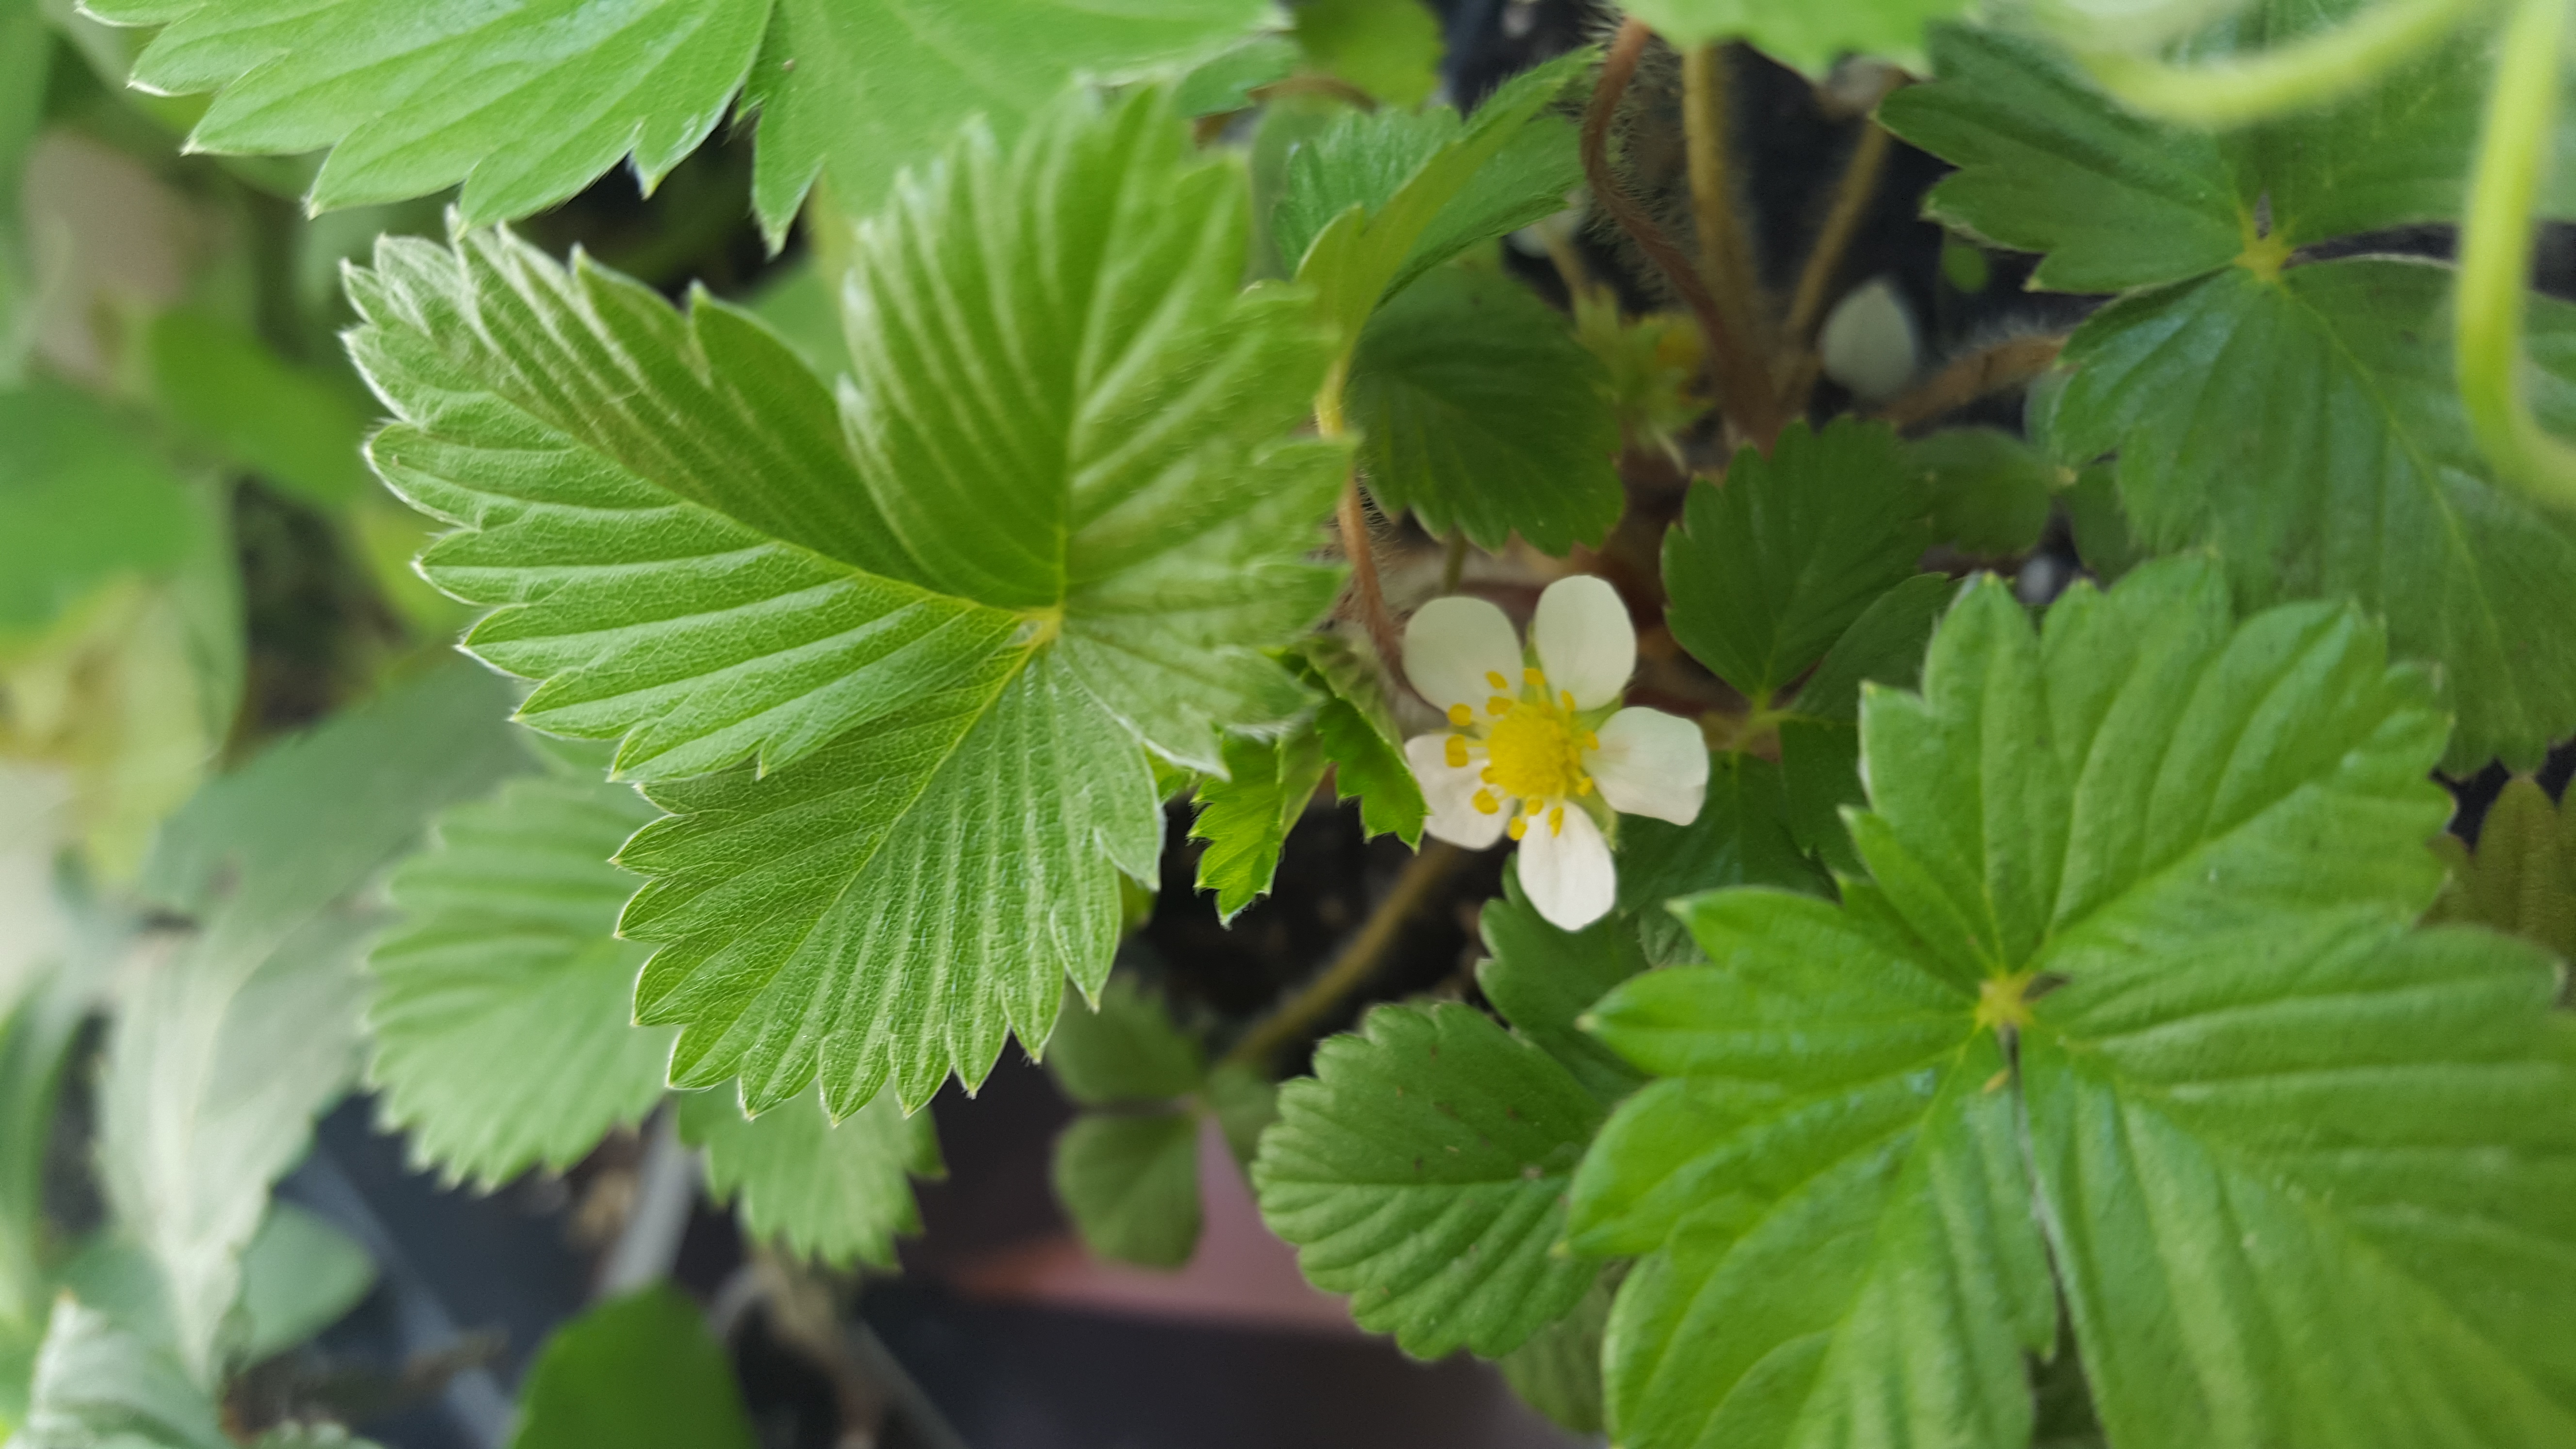 The leaves of a strawberry plant each consist of three parts (trifoliate).